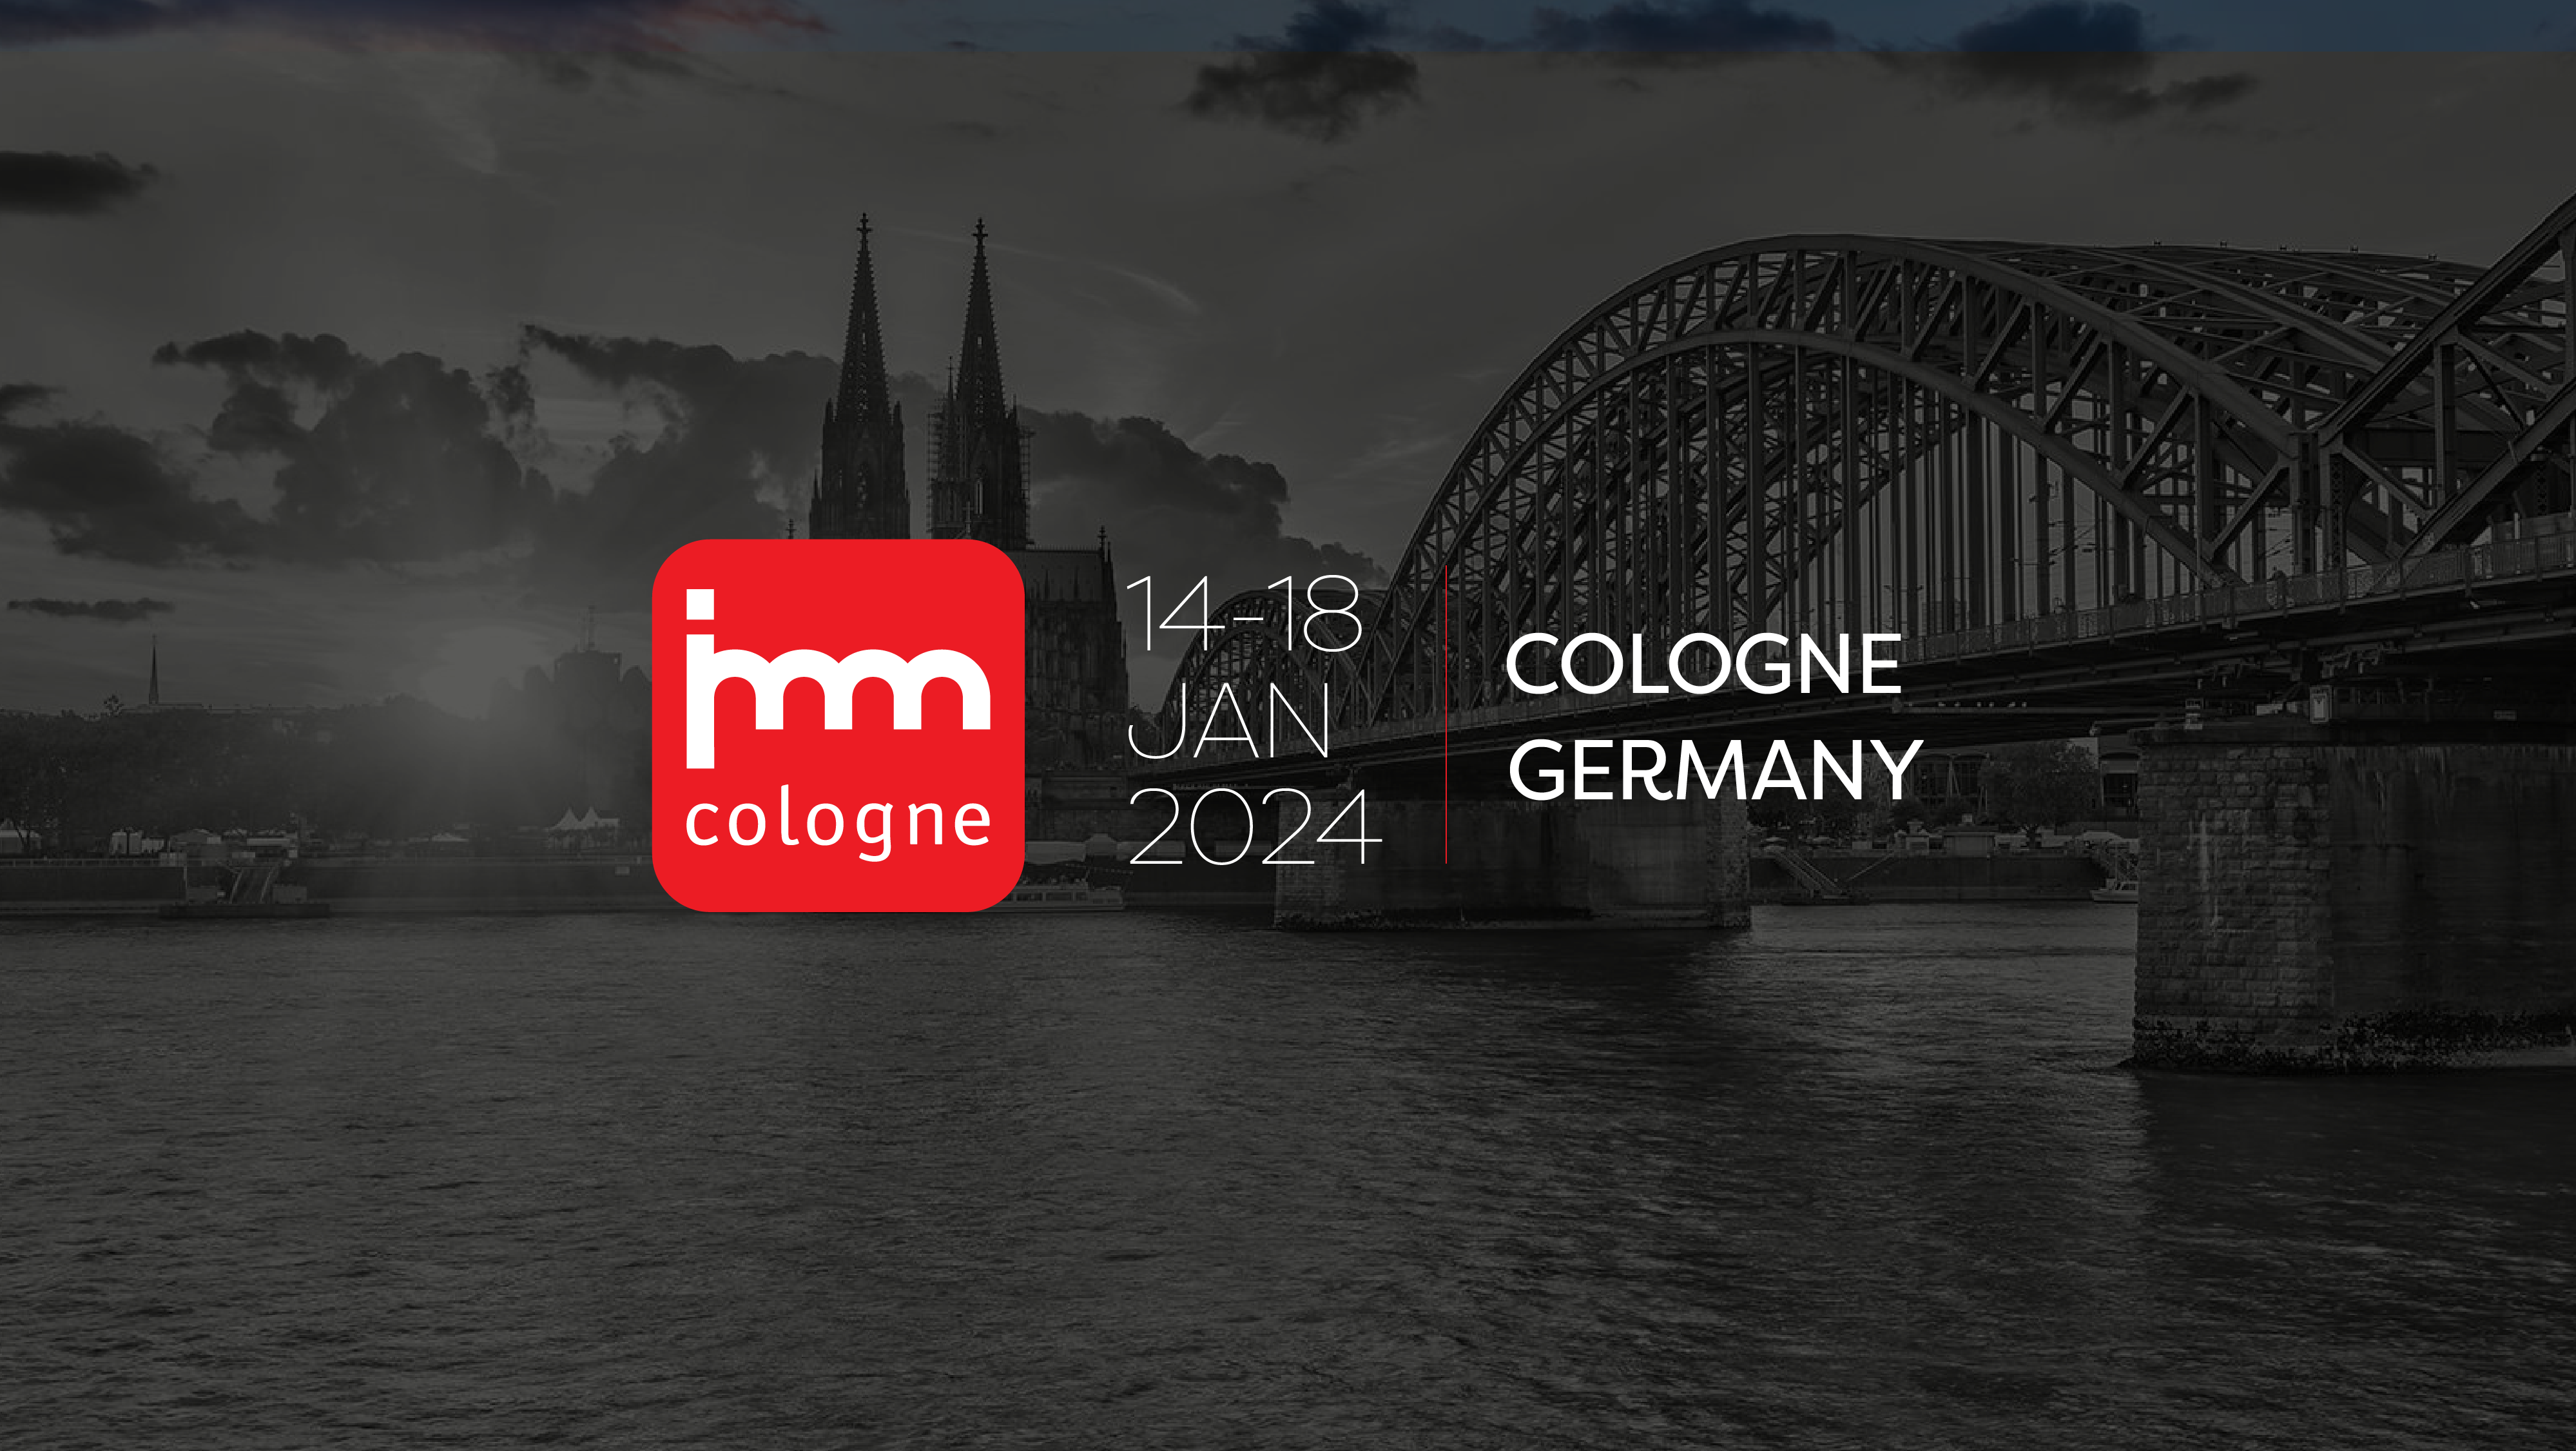 IMM Cologne opens its doors this Sunday in Germany: Brazilian design is expected to stand out amidst awaited trends for the 2024 edition